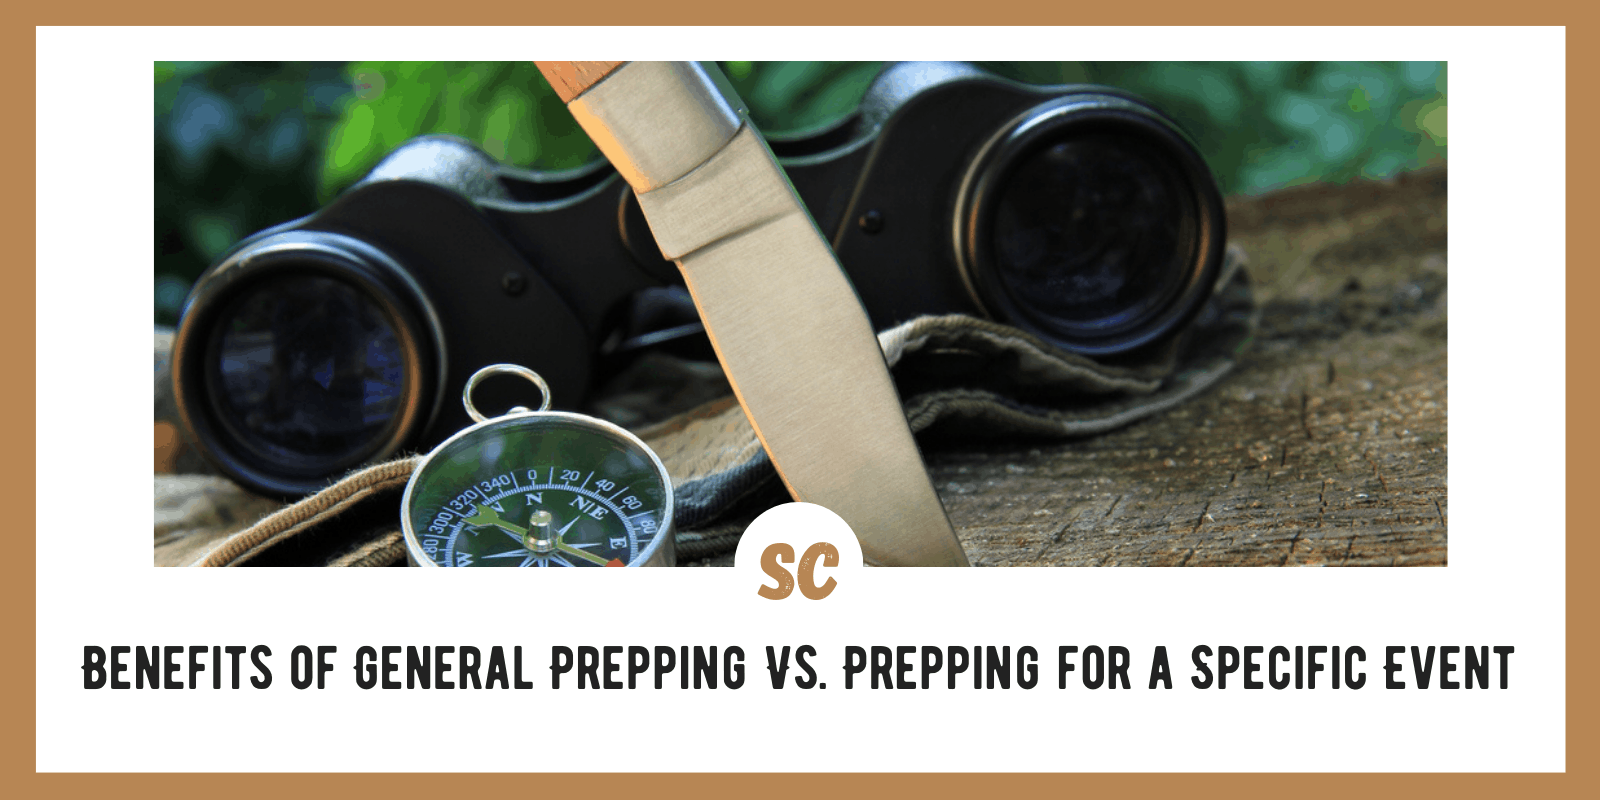 Benefits of General Prepping vs Prepping for a Specific Event